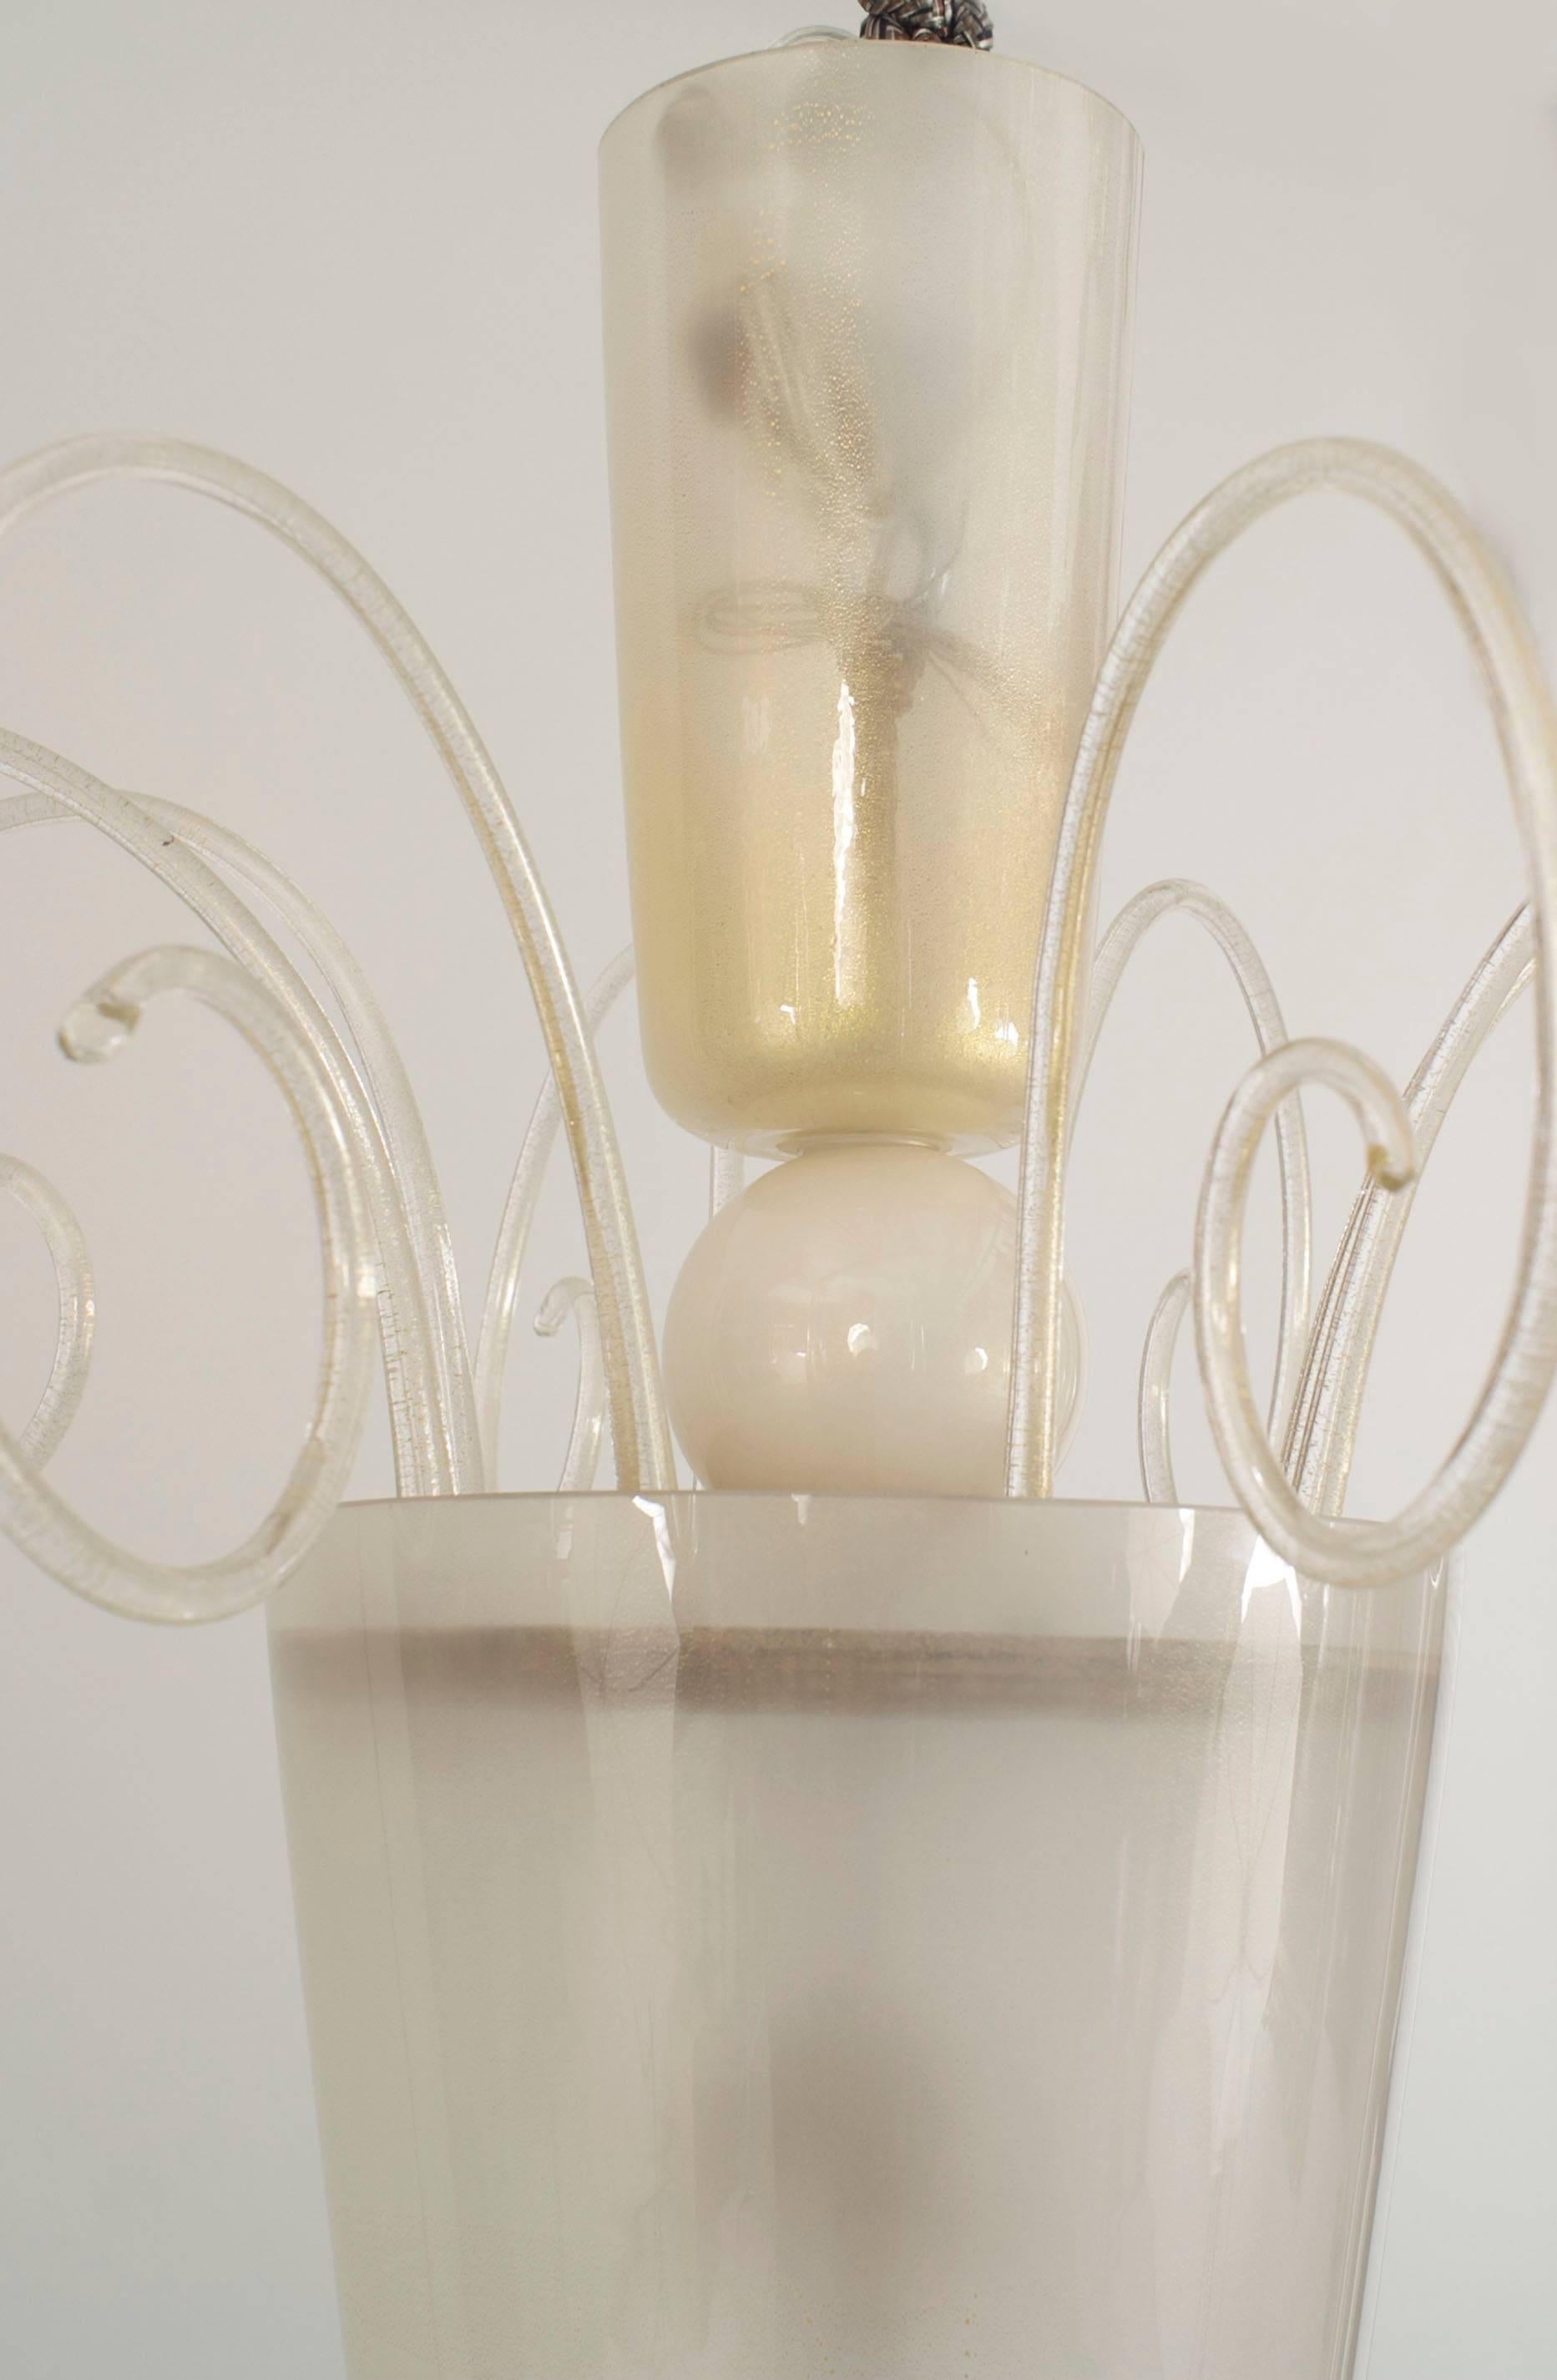 Italian Venetian Murano 1940s frosted glass lantern with a cone form and gold dusted glass scrolls emanating from the top with a ball bottom above a brass finial. (SEGUSO).
